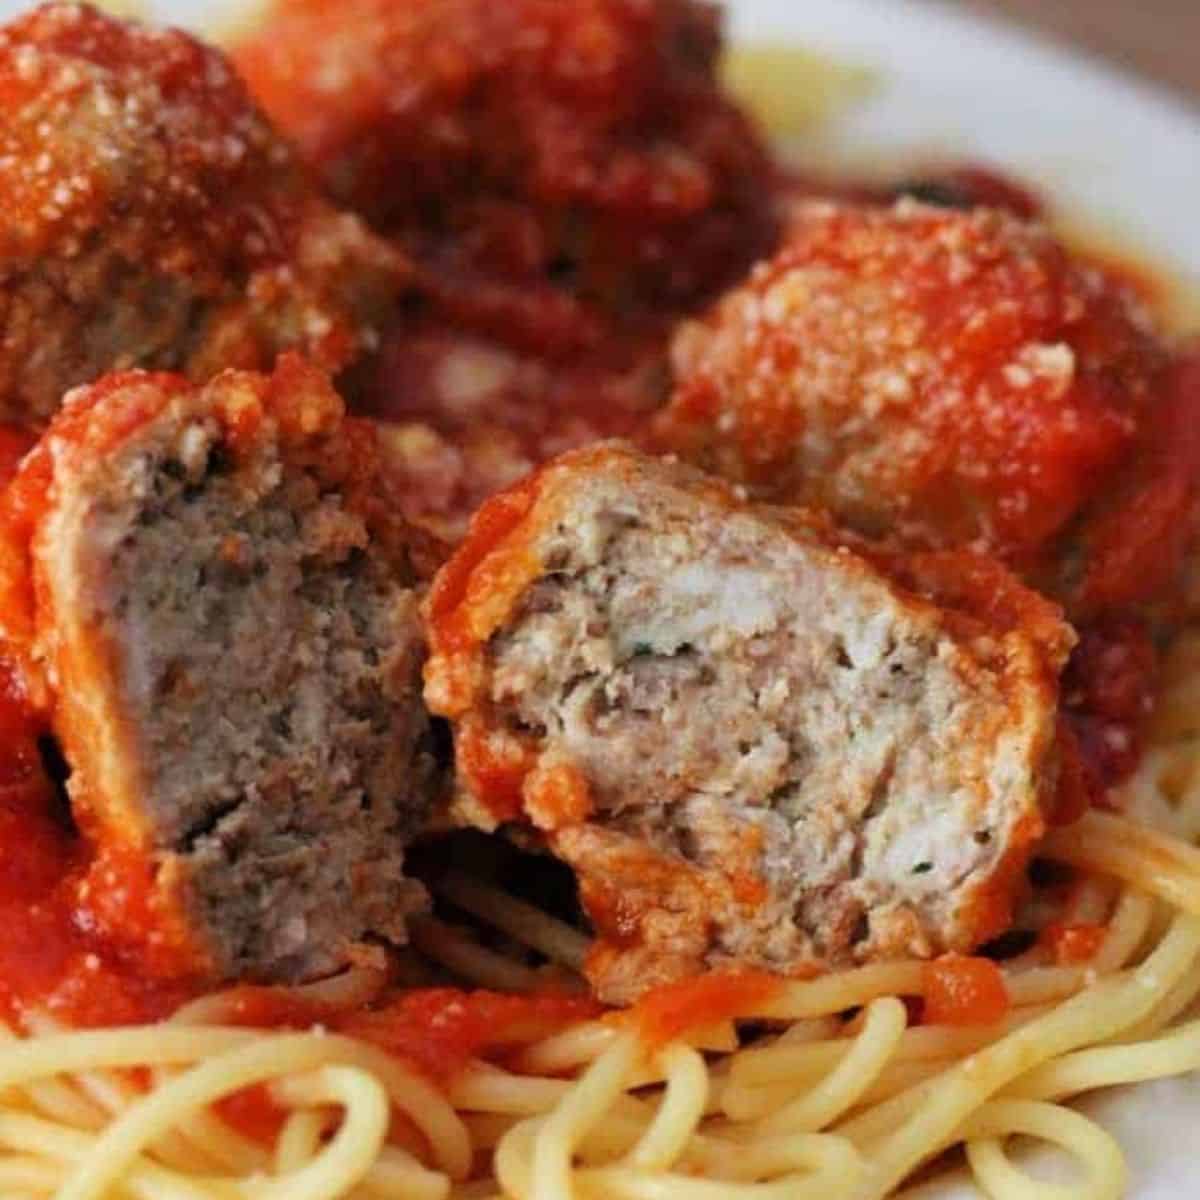 turkey meatballs on a plate with pasta.